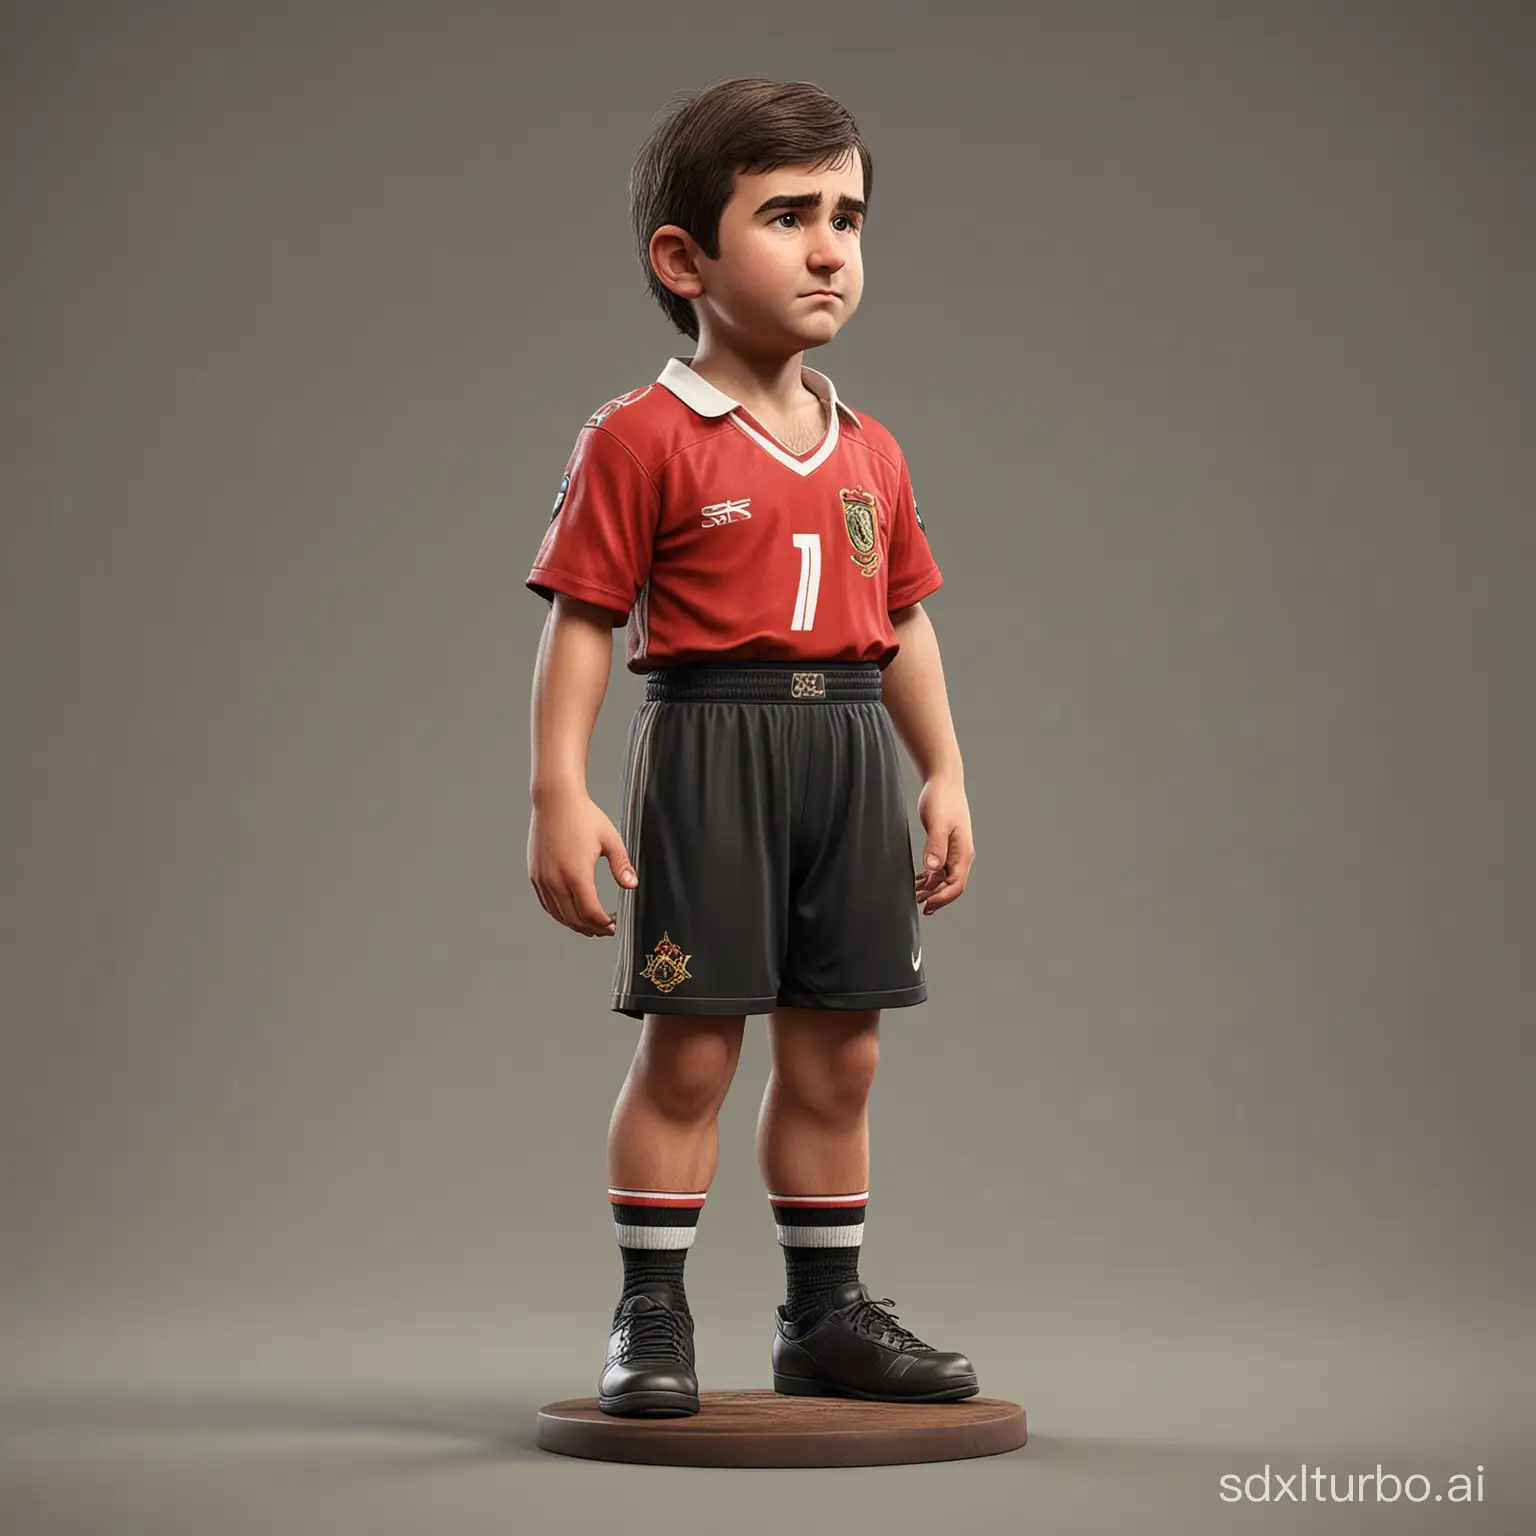 Cantona-Game-Character-Little-Child-Standing-Tall